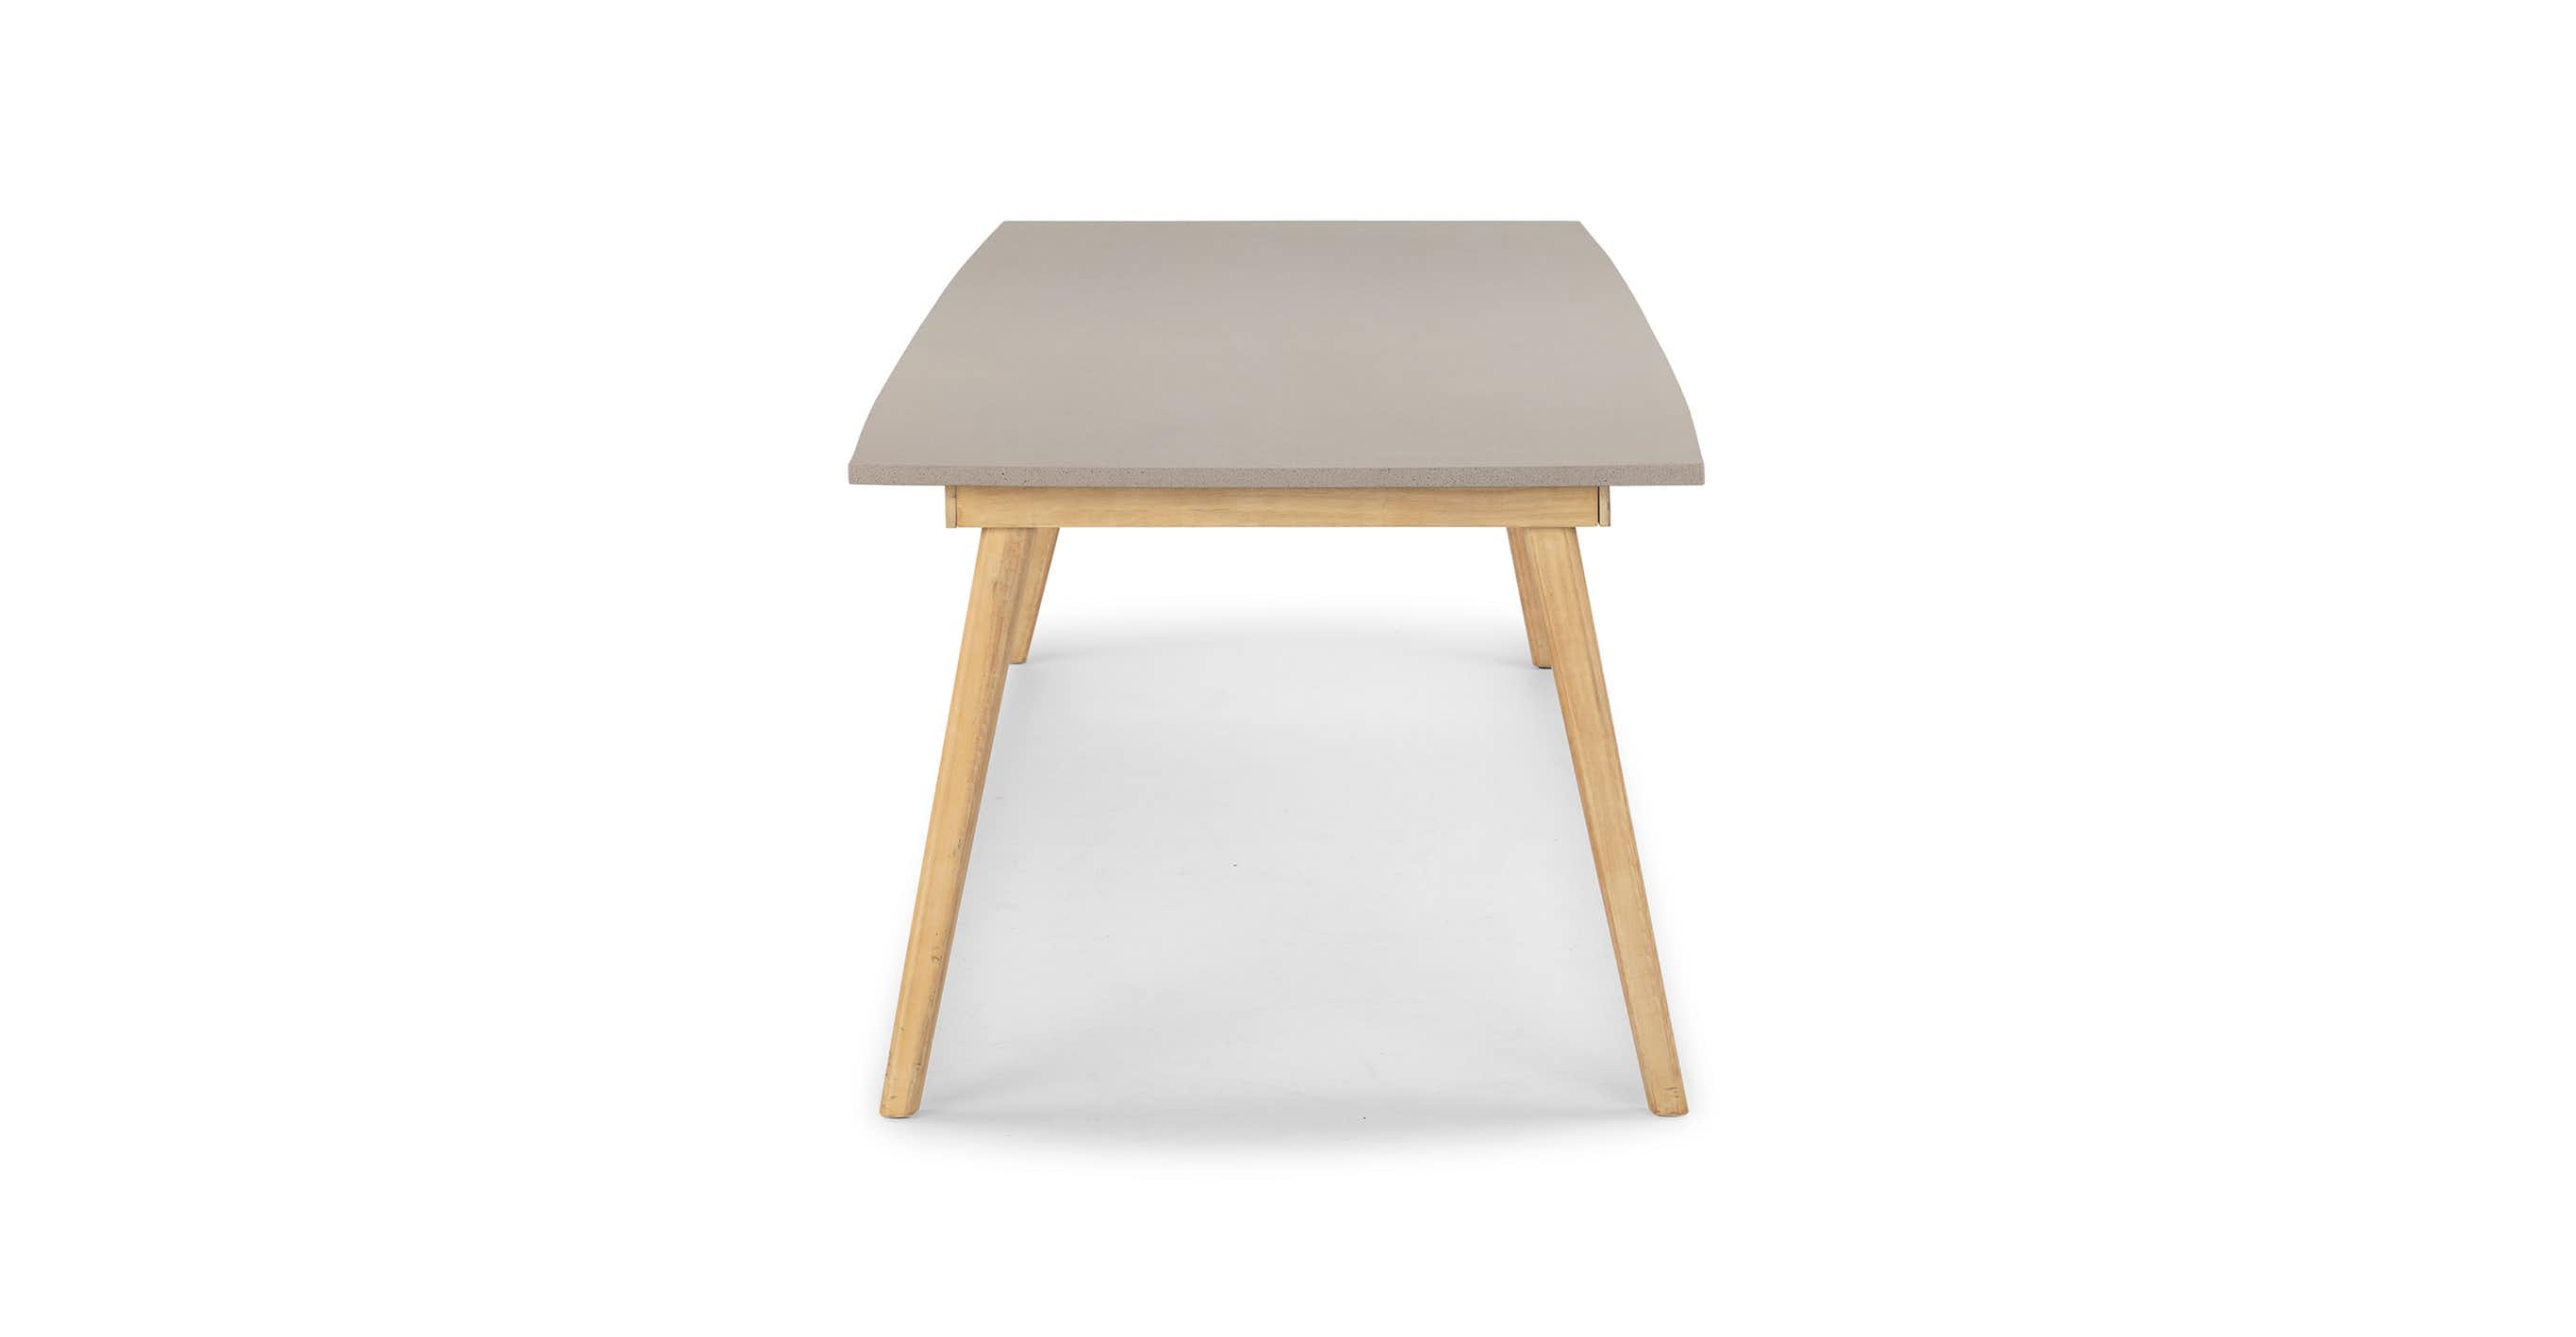 Atra Concrete Dining Table for 6 - Image 1